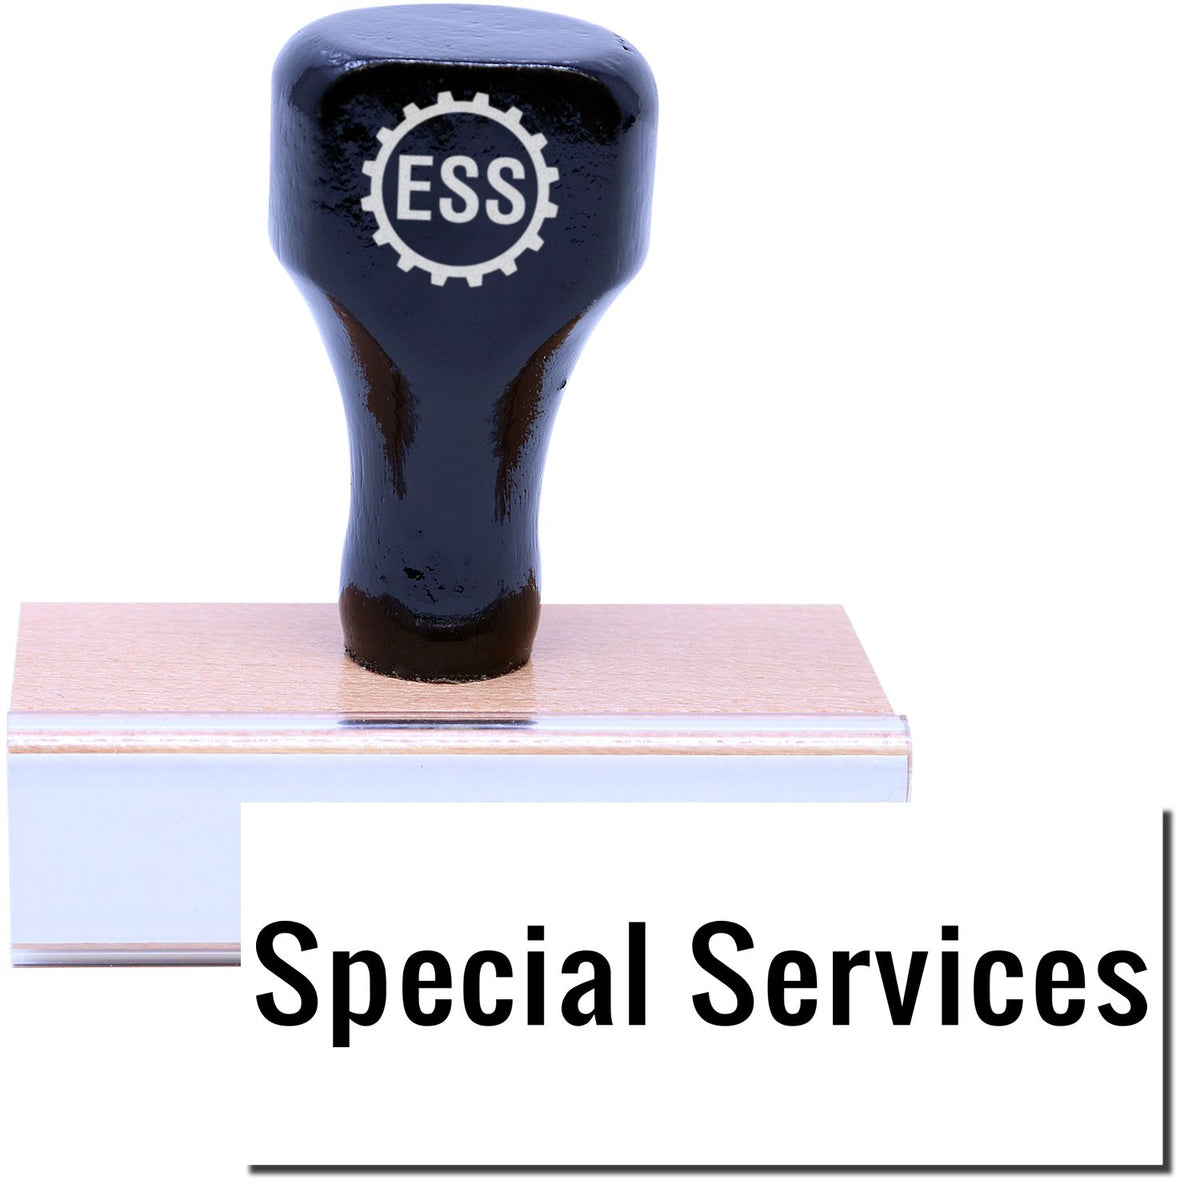 A stock office rubber stamp with a stamped image showing how the text &quot;SPECIAL SERVICES&quot; in a large font is displayed after stamping.